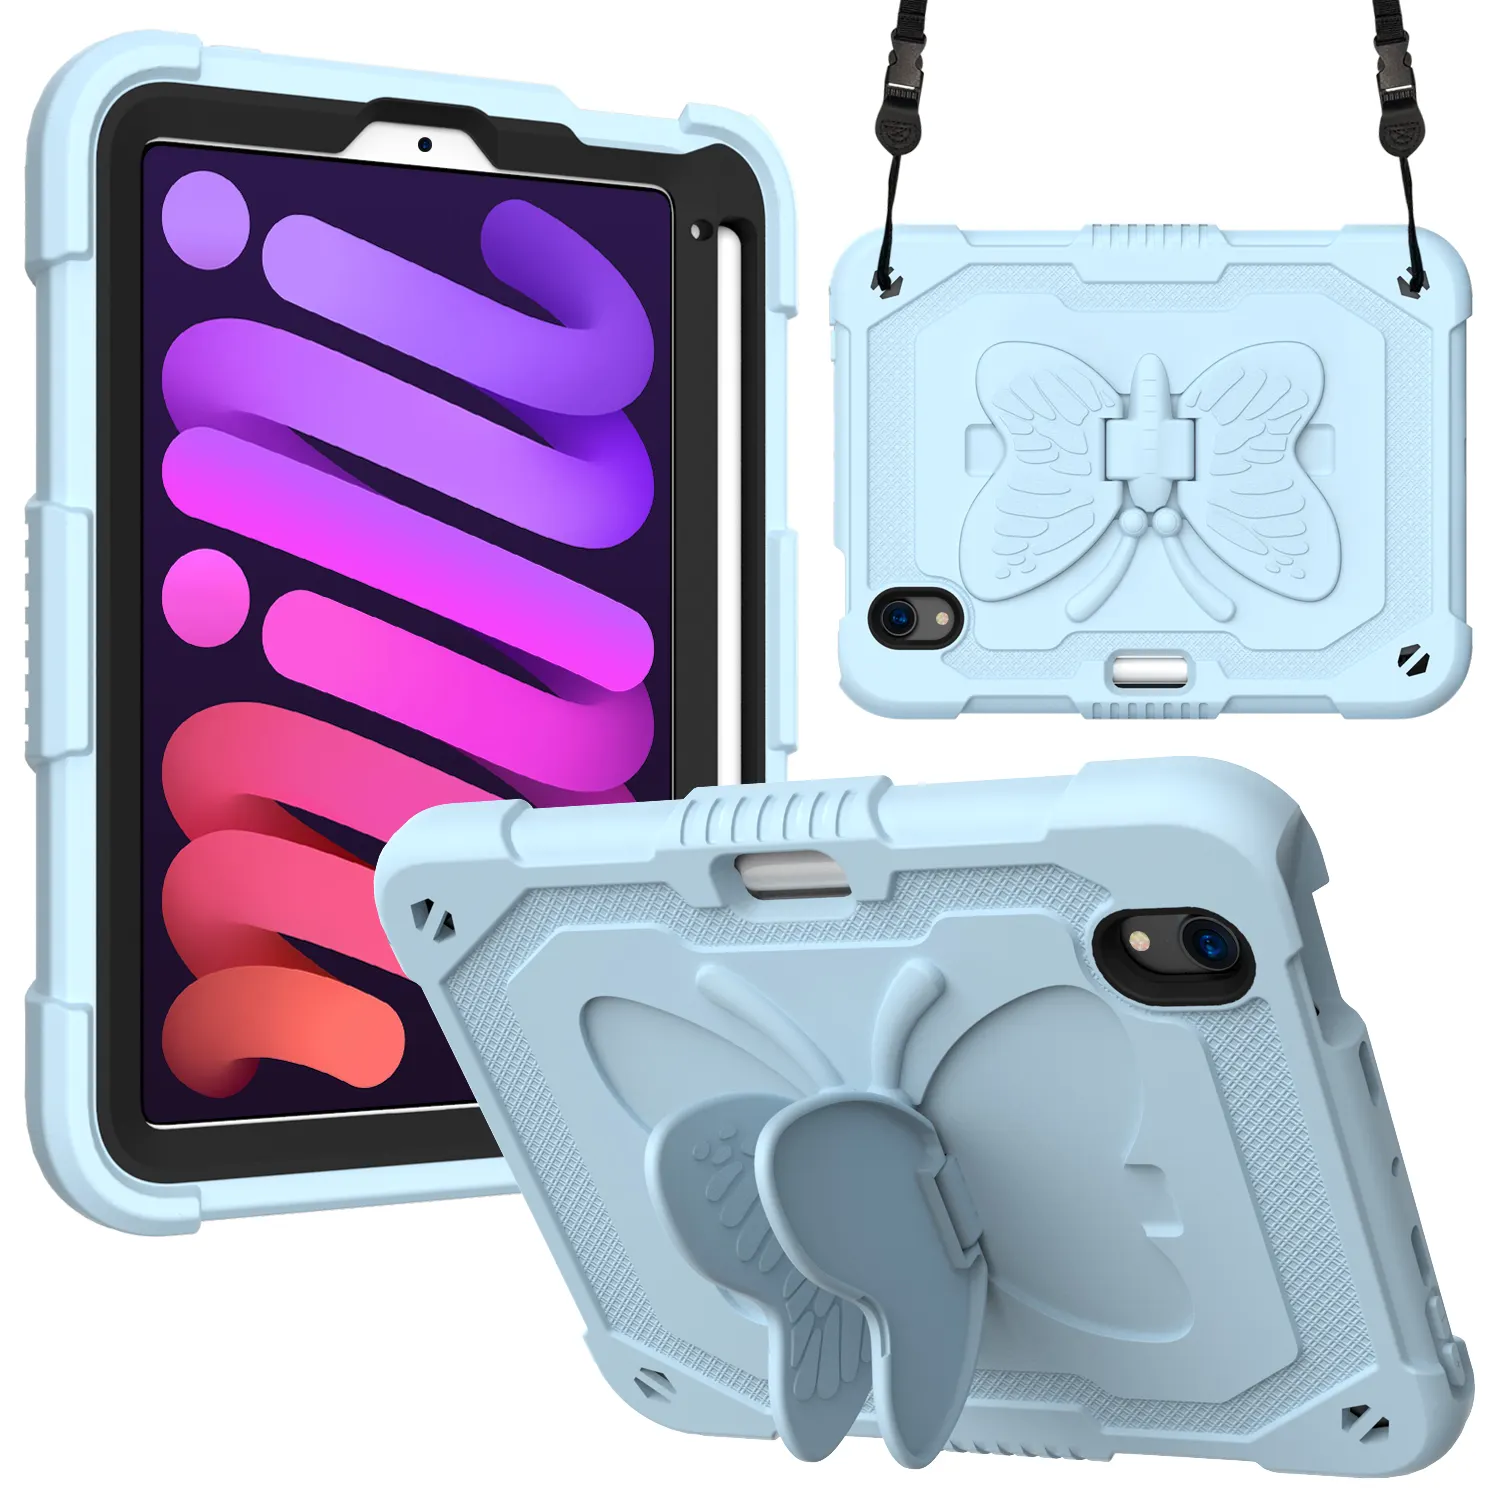 Rugged defender silicone cover with butterfly kickstand school education kids shockproof Case for iPad Mini 6 2021